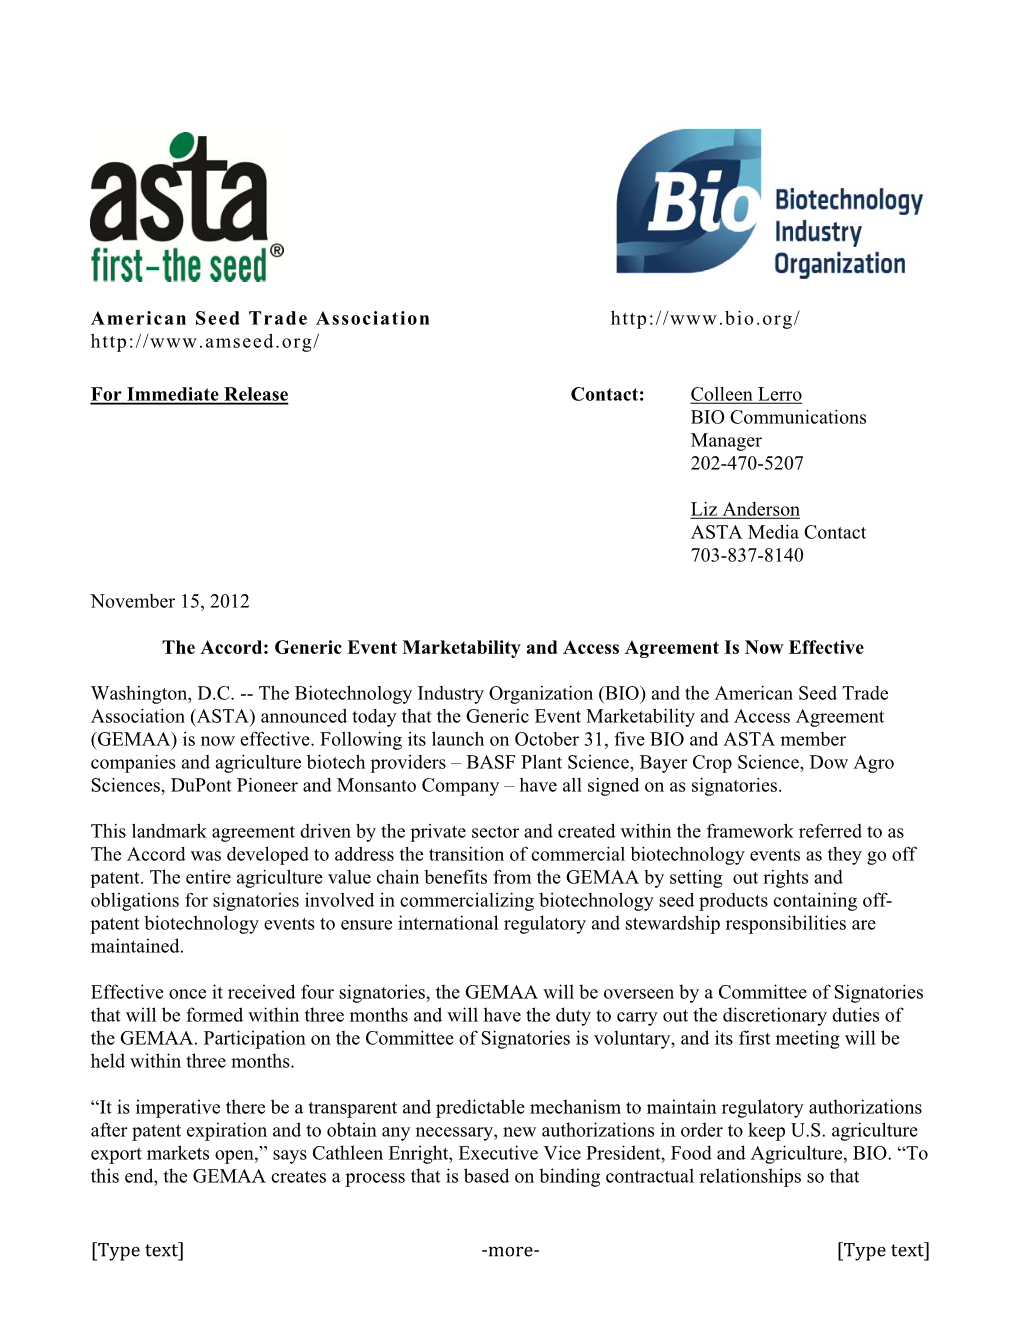 BIO and ASTA Press Release on GEMAA Implementation